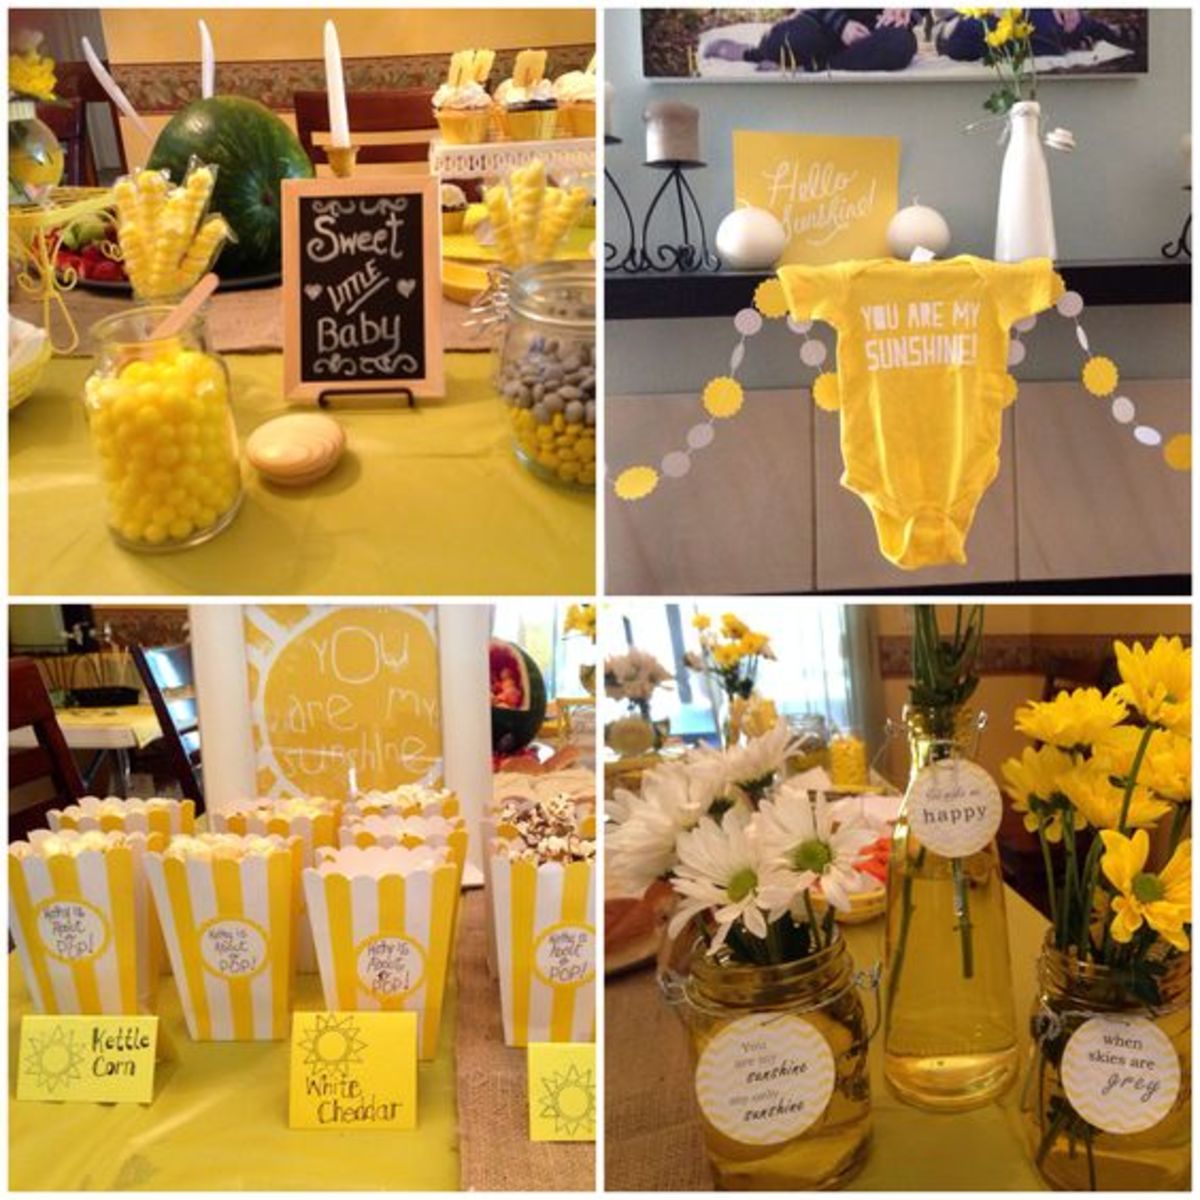 You Are My Sunshine baby shower, yellow and gray, popcorn, candy bar, daisies